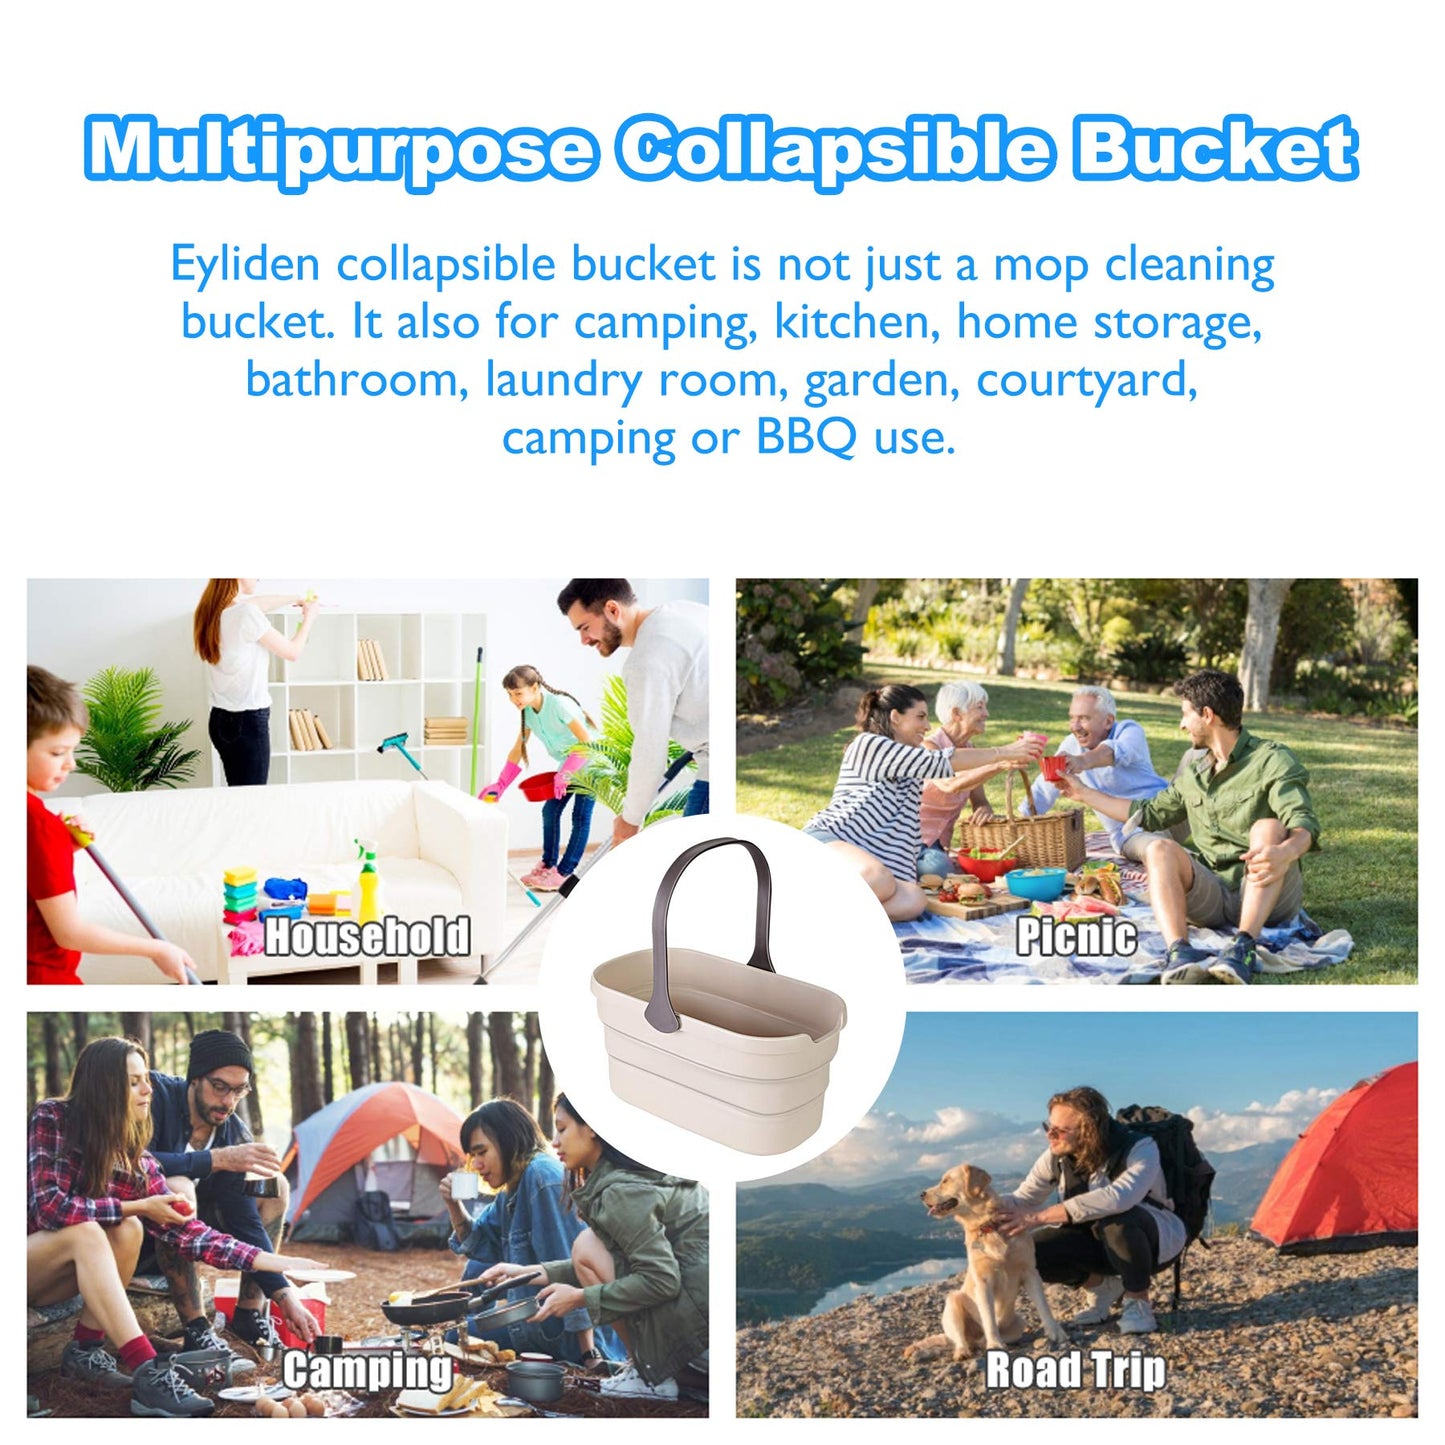 Eyliden Collapsible Bucket, Bucket for Cleaning Mop, 10L(2.6Gallon) Multiuse Foldable Water Pail, Portable Handy Basket for Cleaning Mop, Camping, Tailgating and More